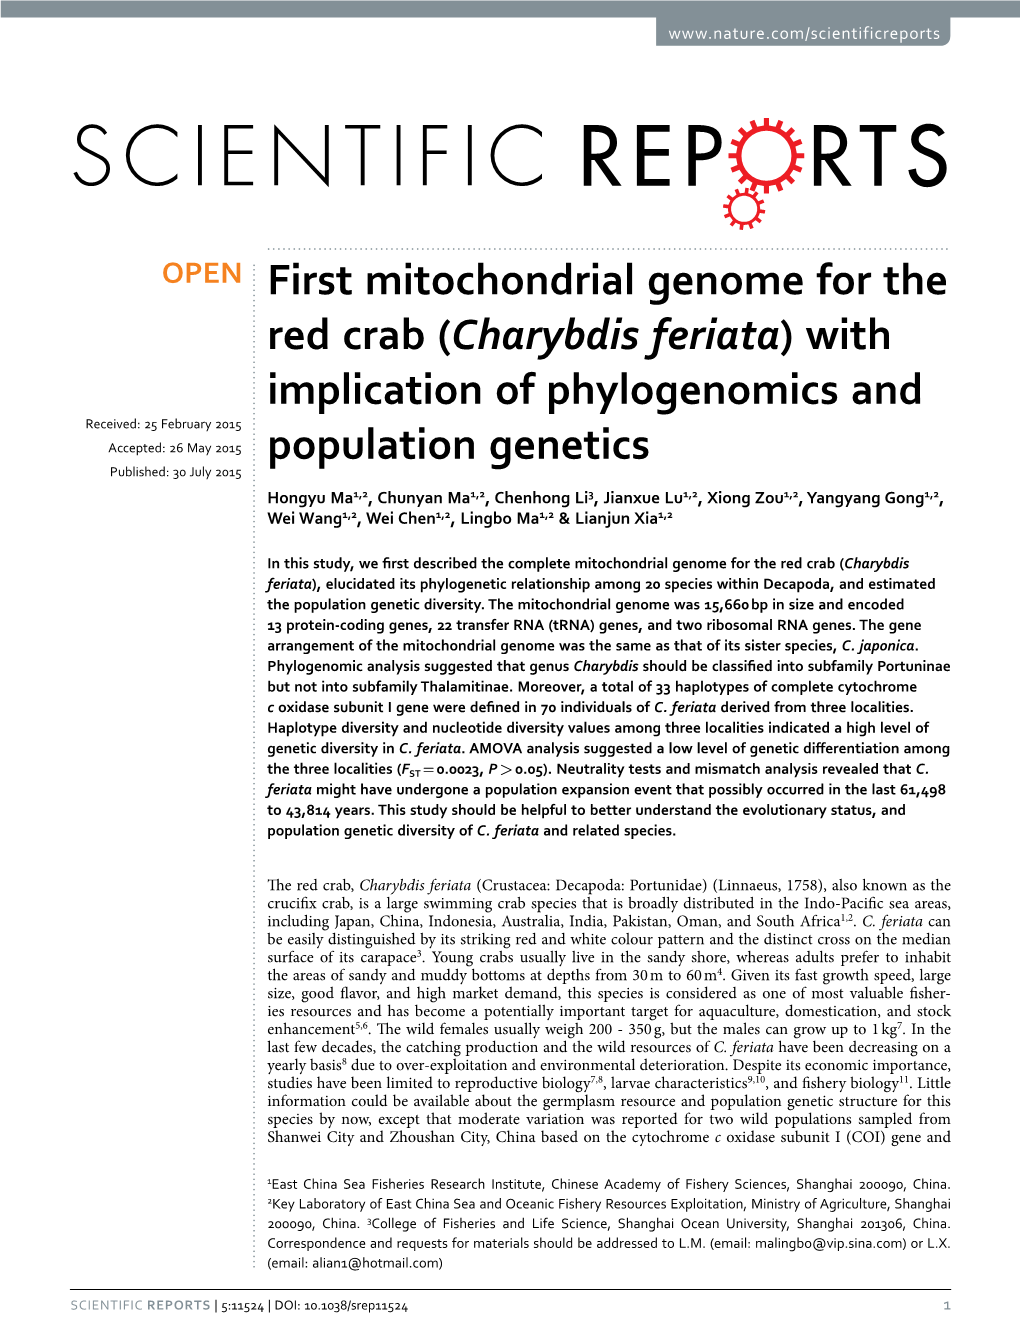 First Mitochondrial Genome for the Red Crab (Charybdis Feriata) With